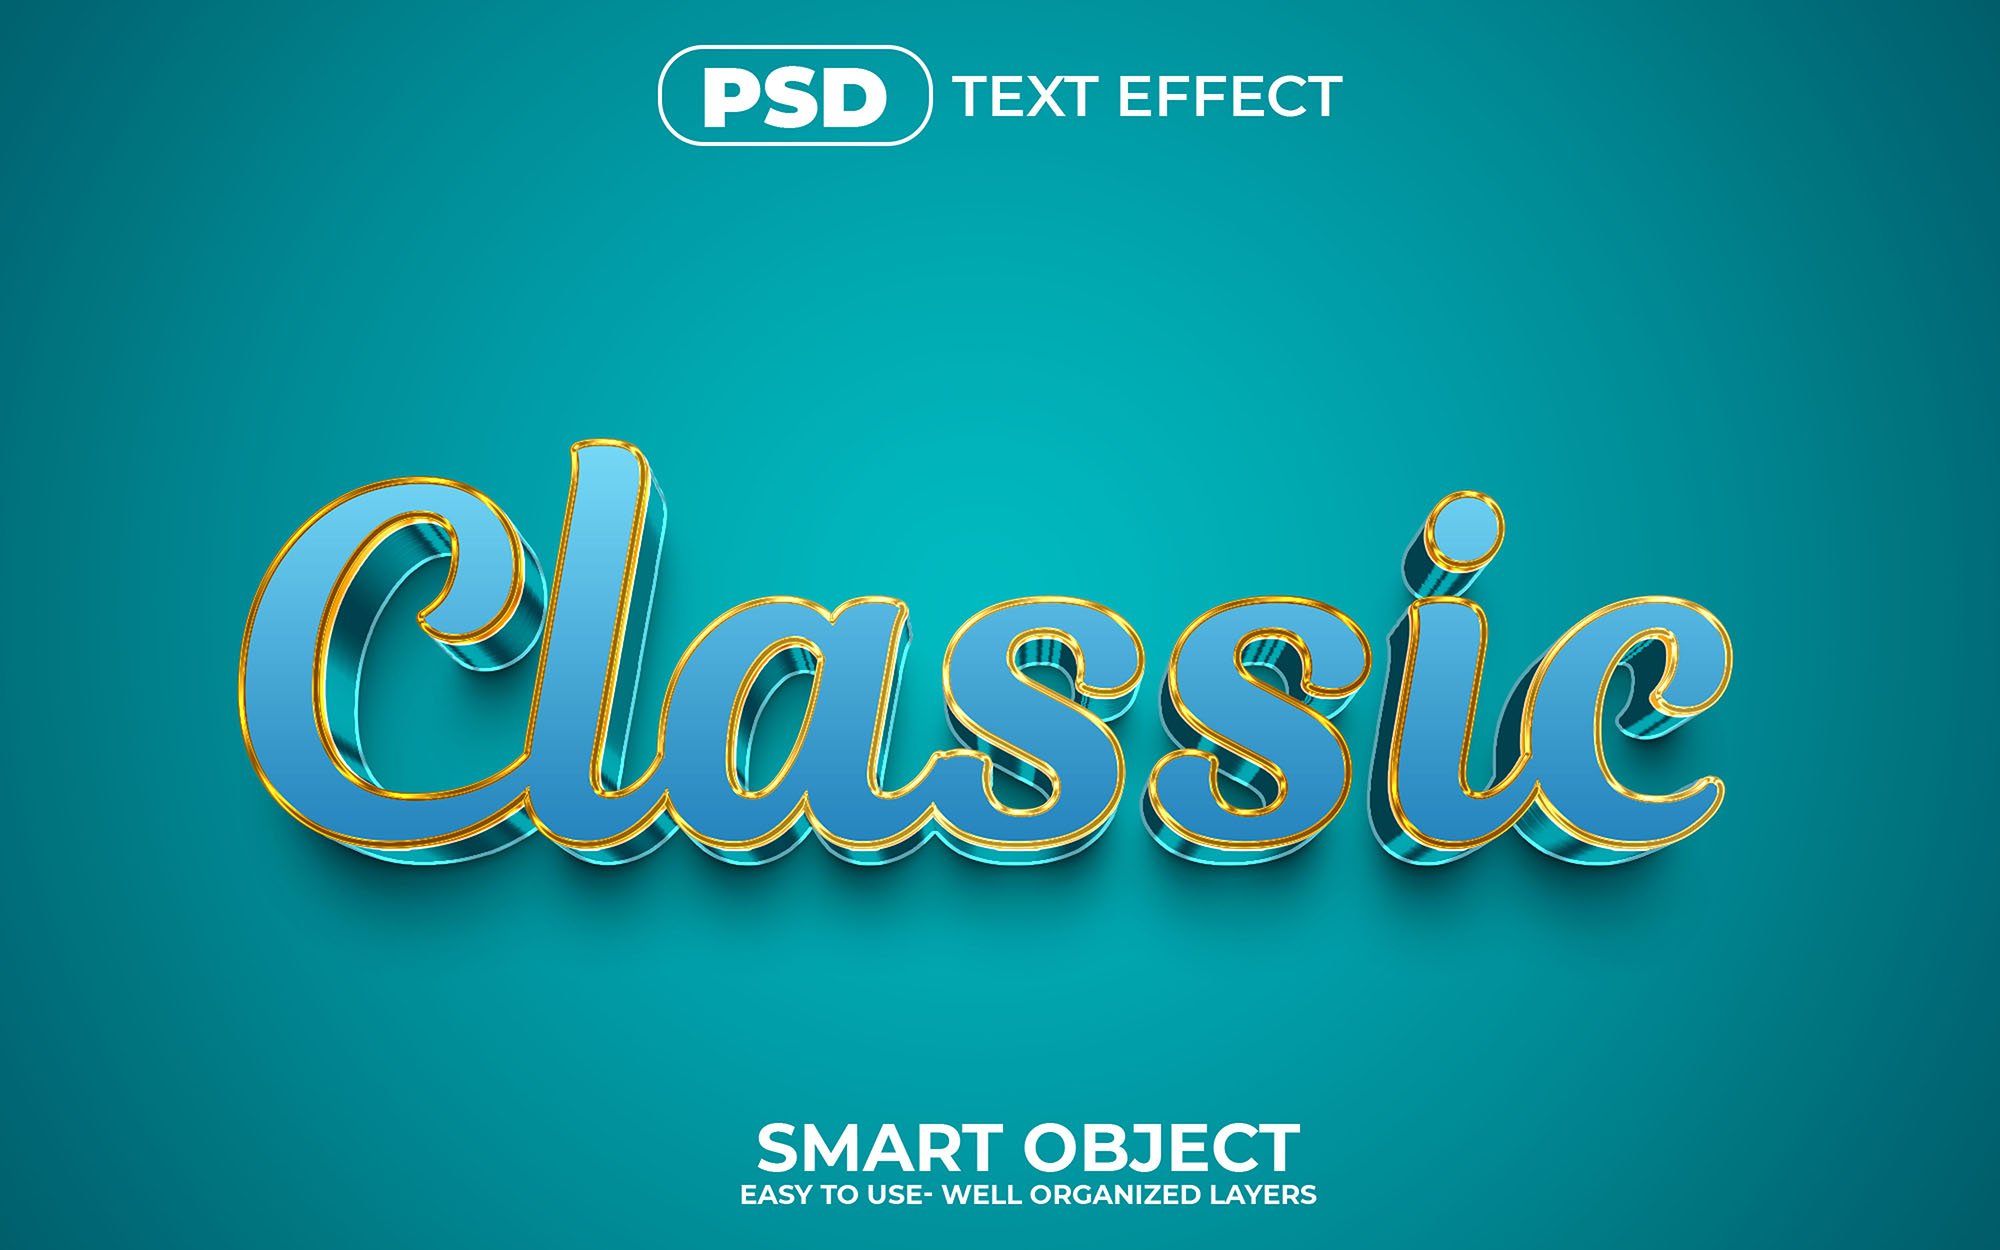 3D Classic Editable psd Text Effectcover image.